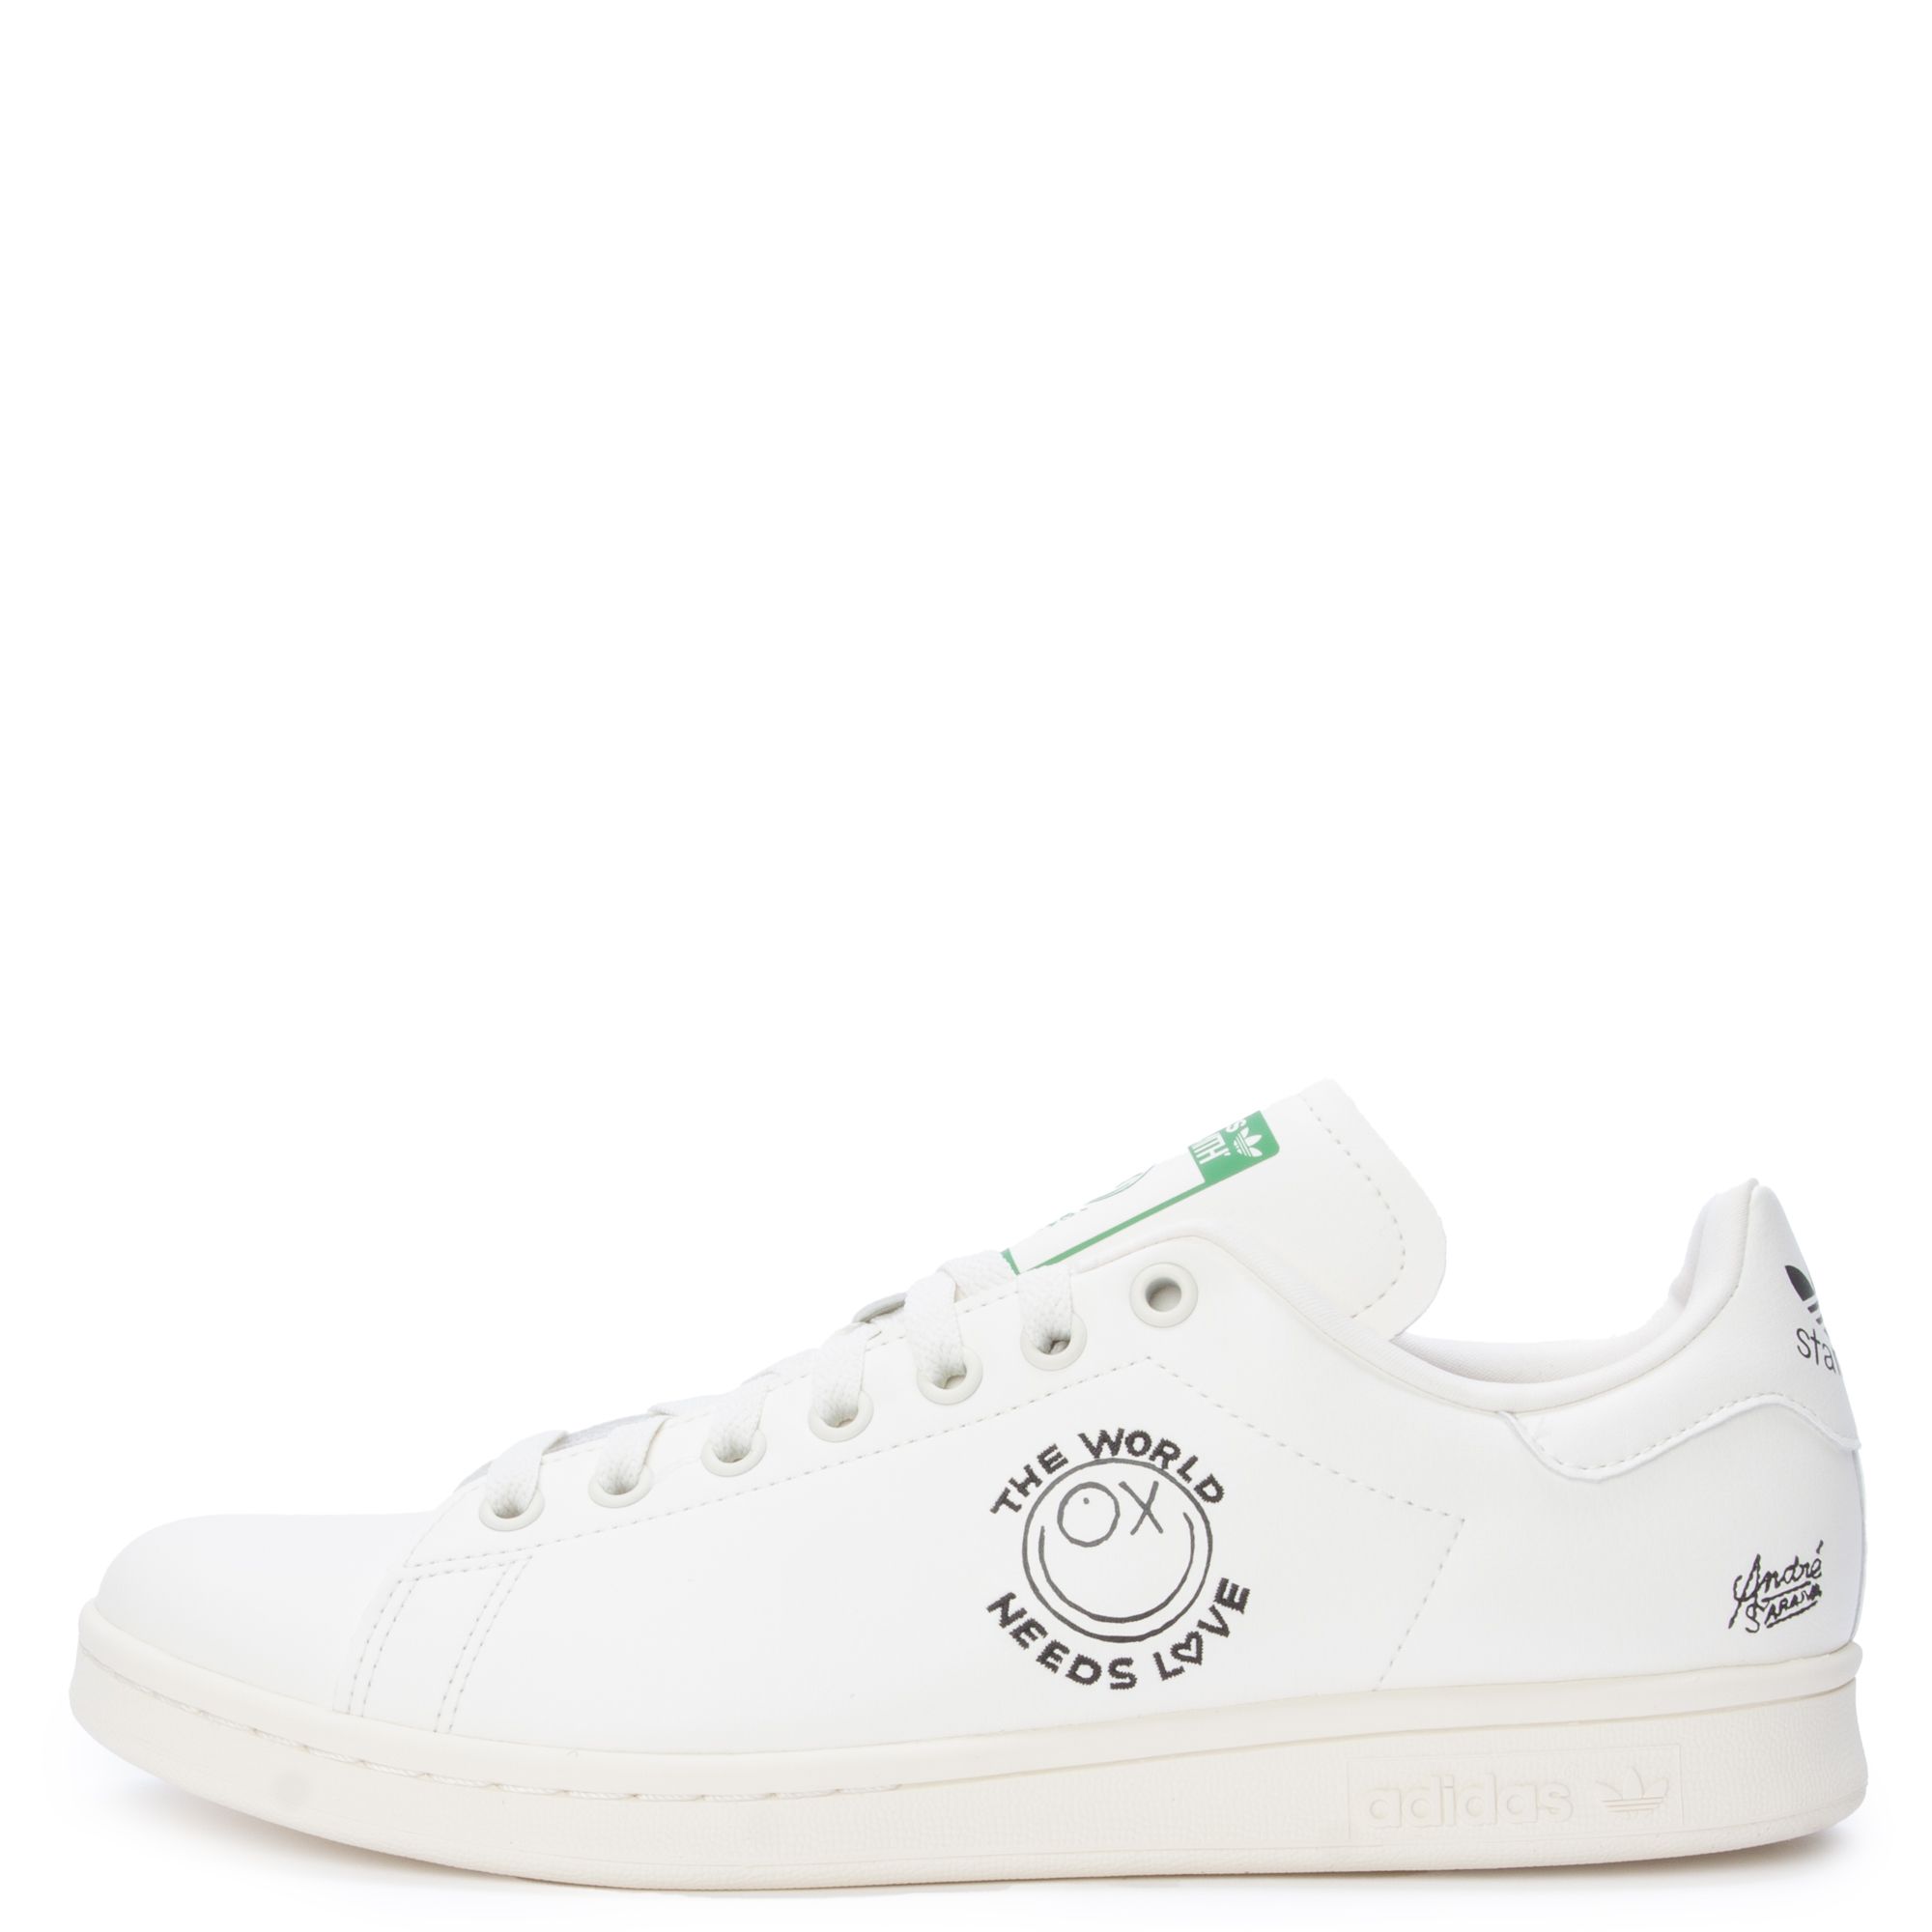 adidas Originals mens Stan Smith Sneaker, Ftwr White/Core White/Green, 4 US  : ADIDAS: : Clothing, Shoes & Accessories